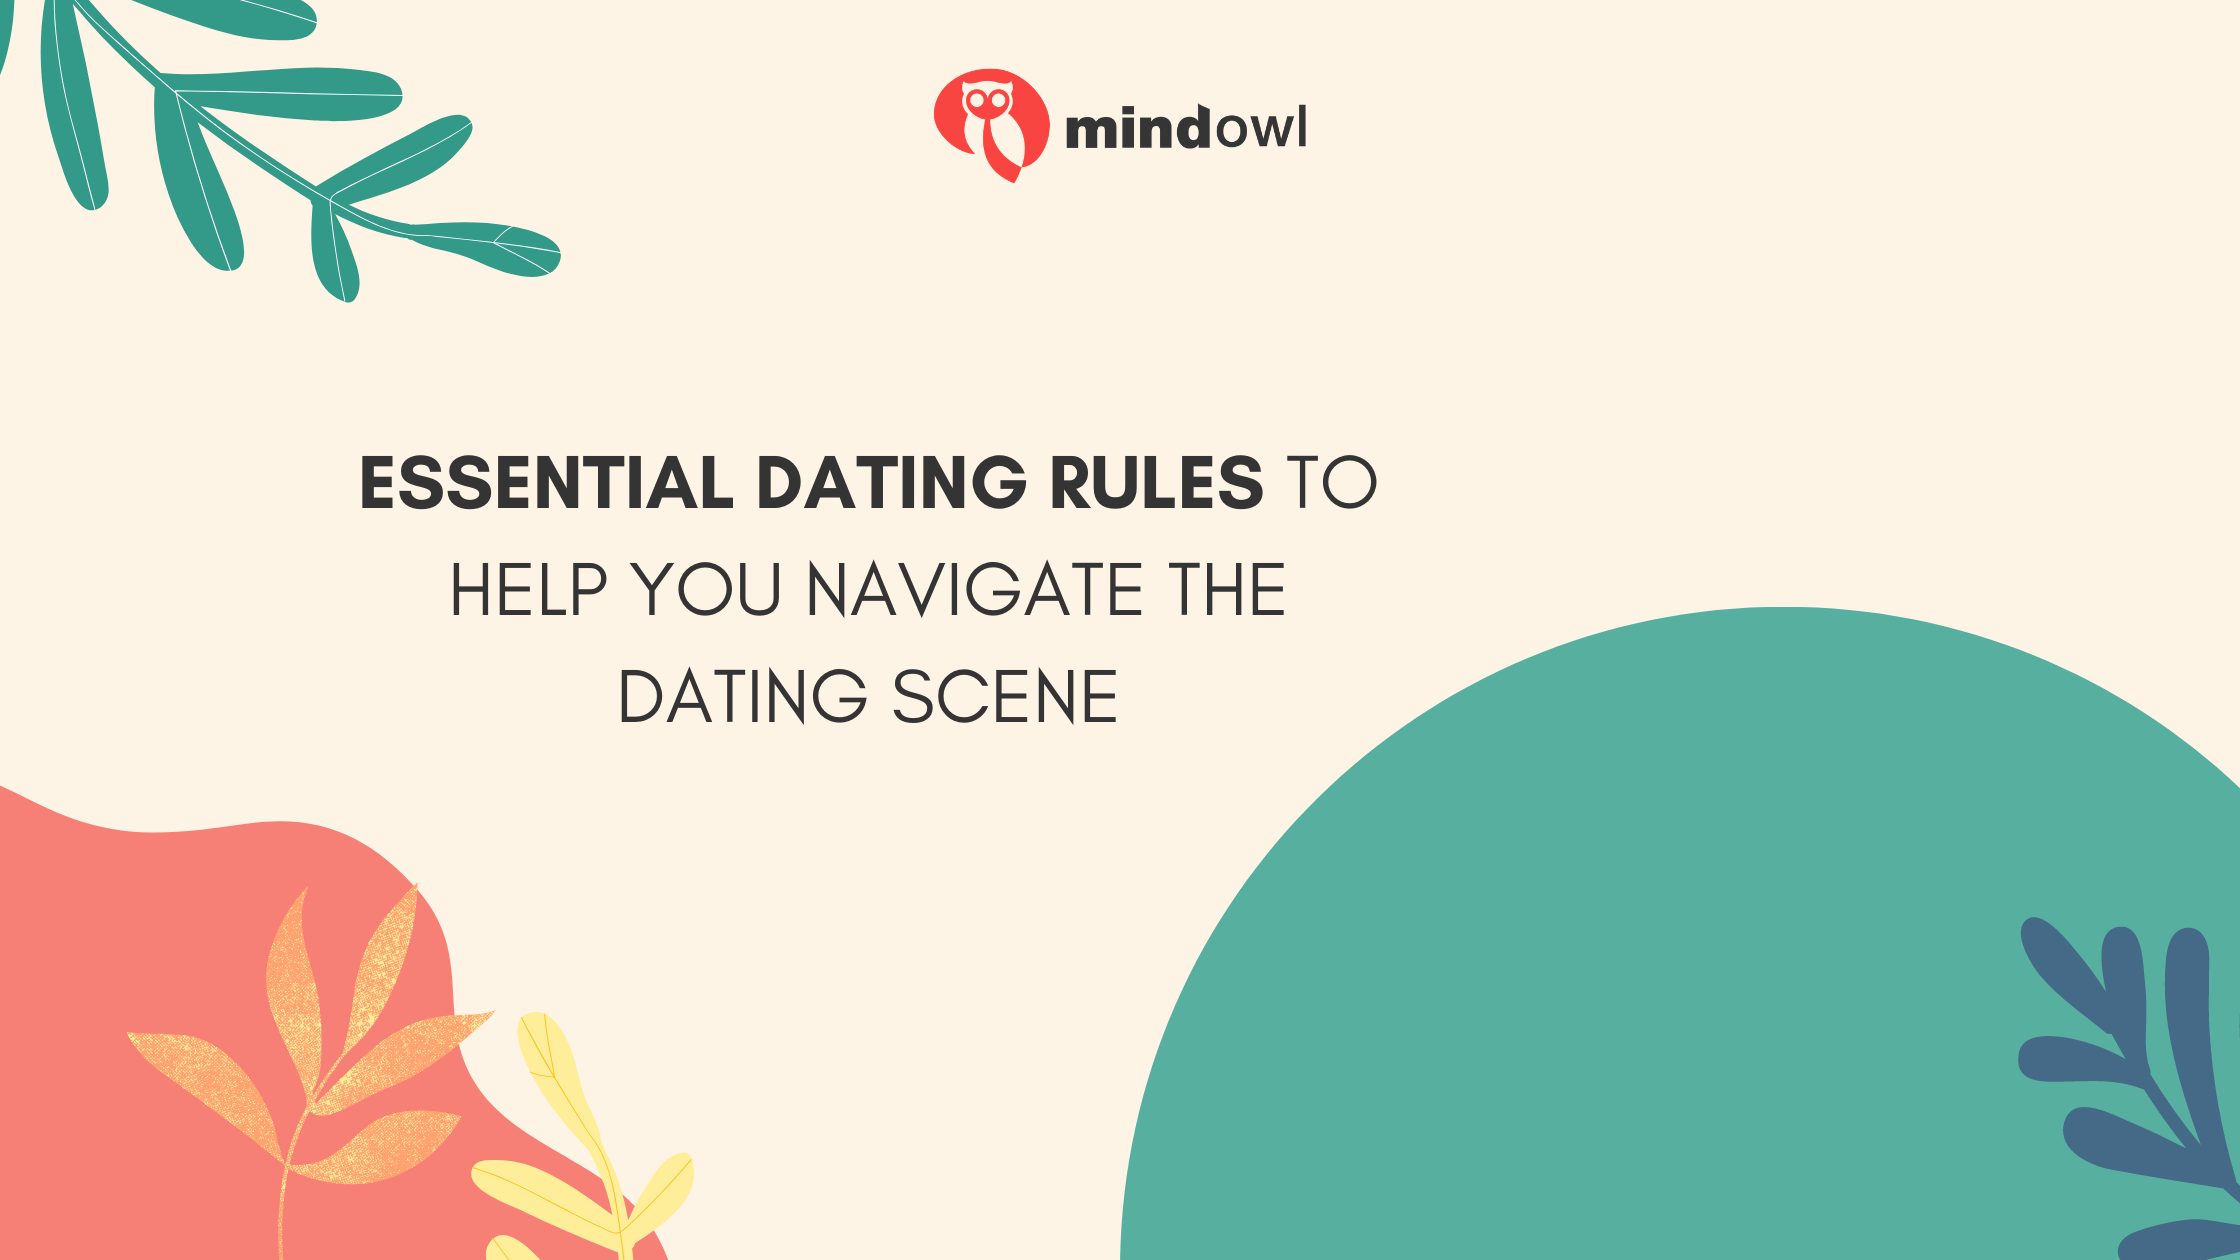 Essential Dating Rules to Navigate the Dating Scene